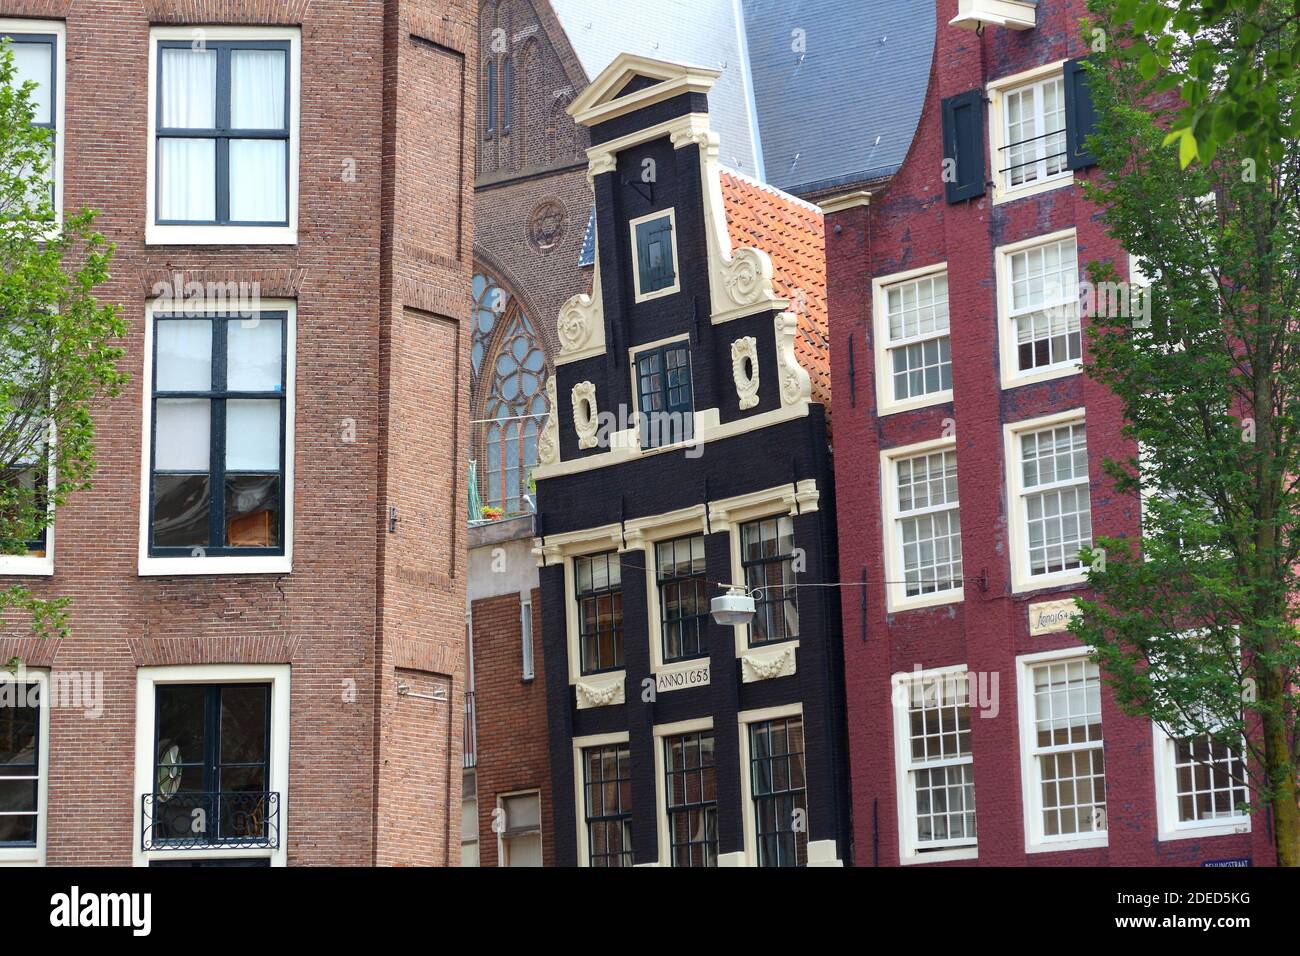 Amsterdam city architecture - crooked residential buildings. Netherlands rowhouse. Stock Photo